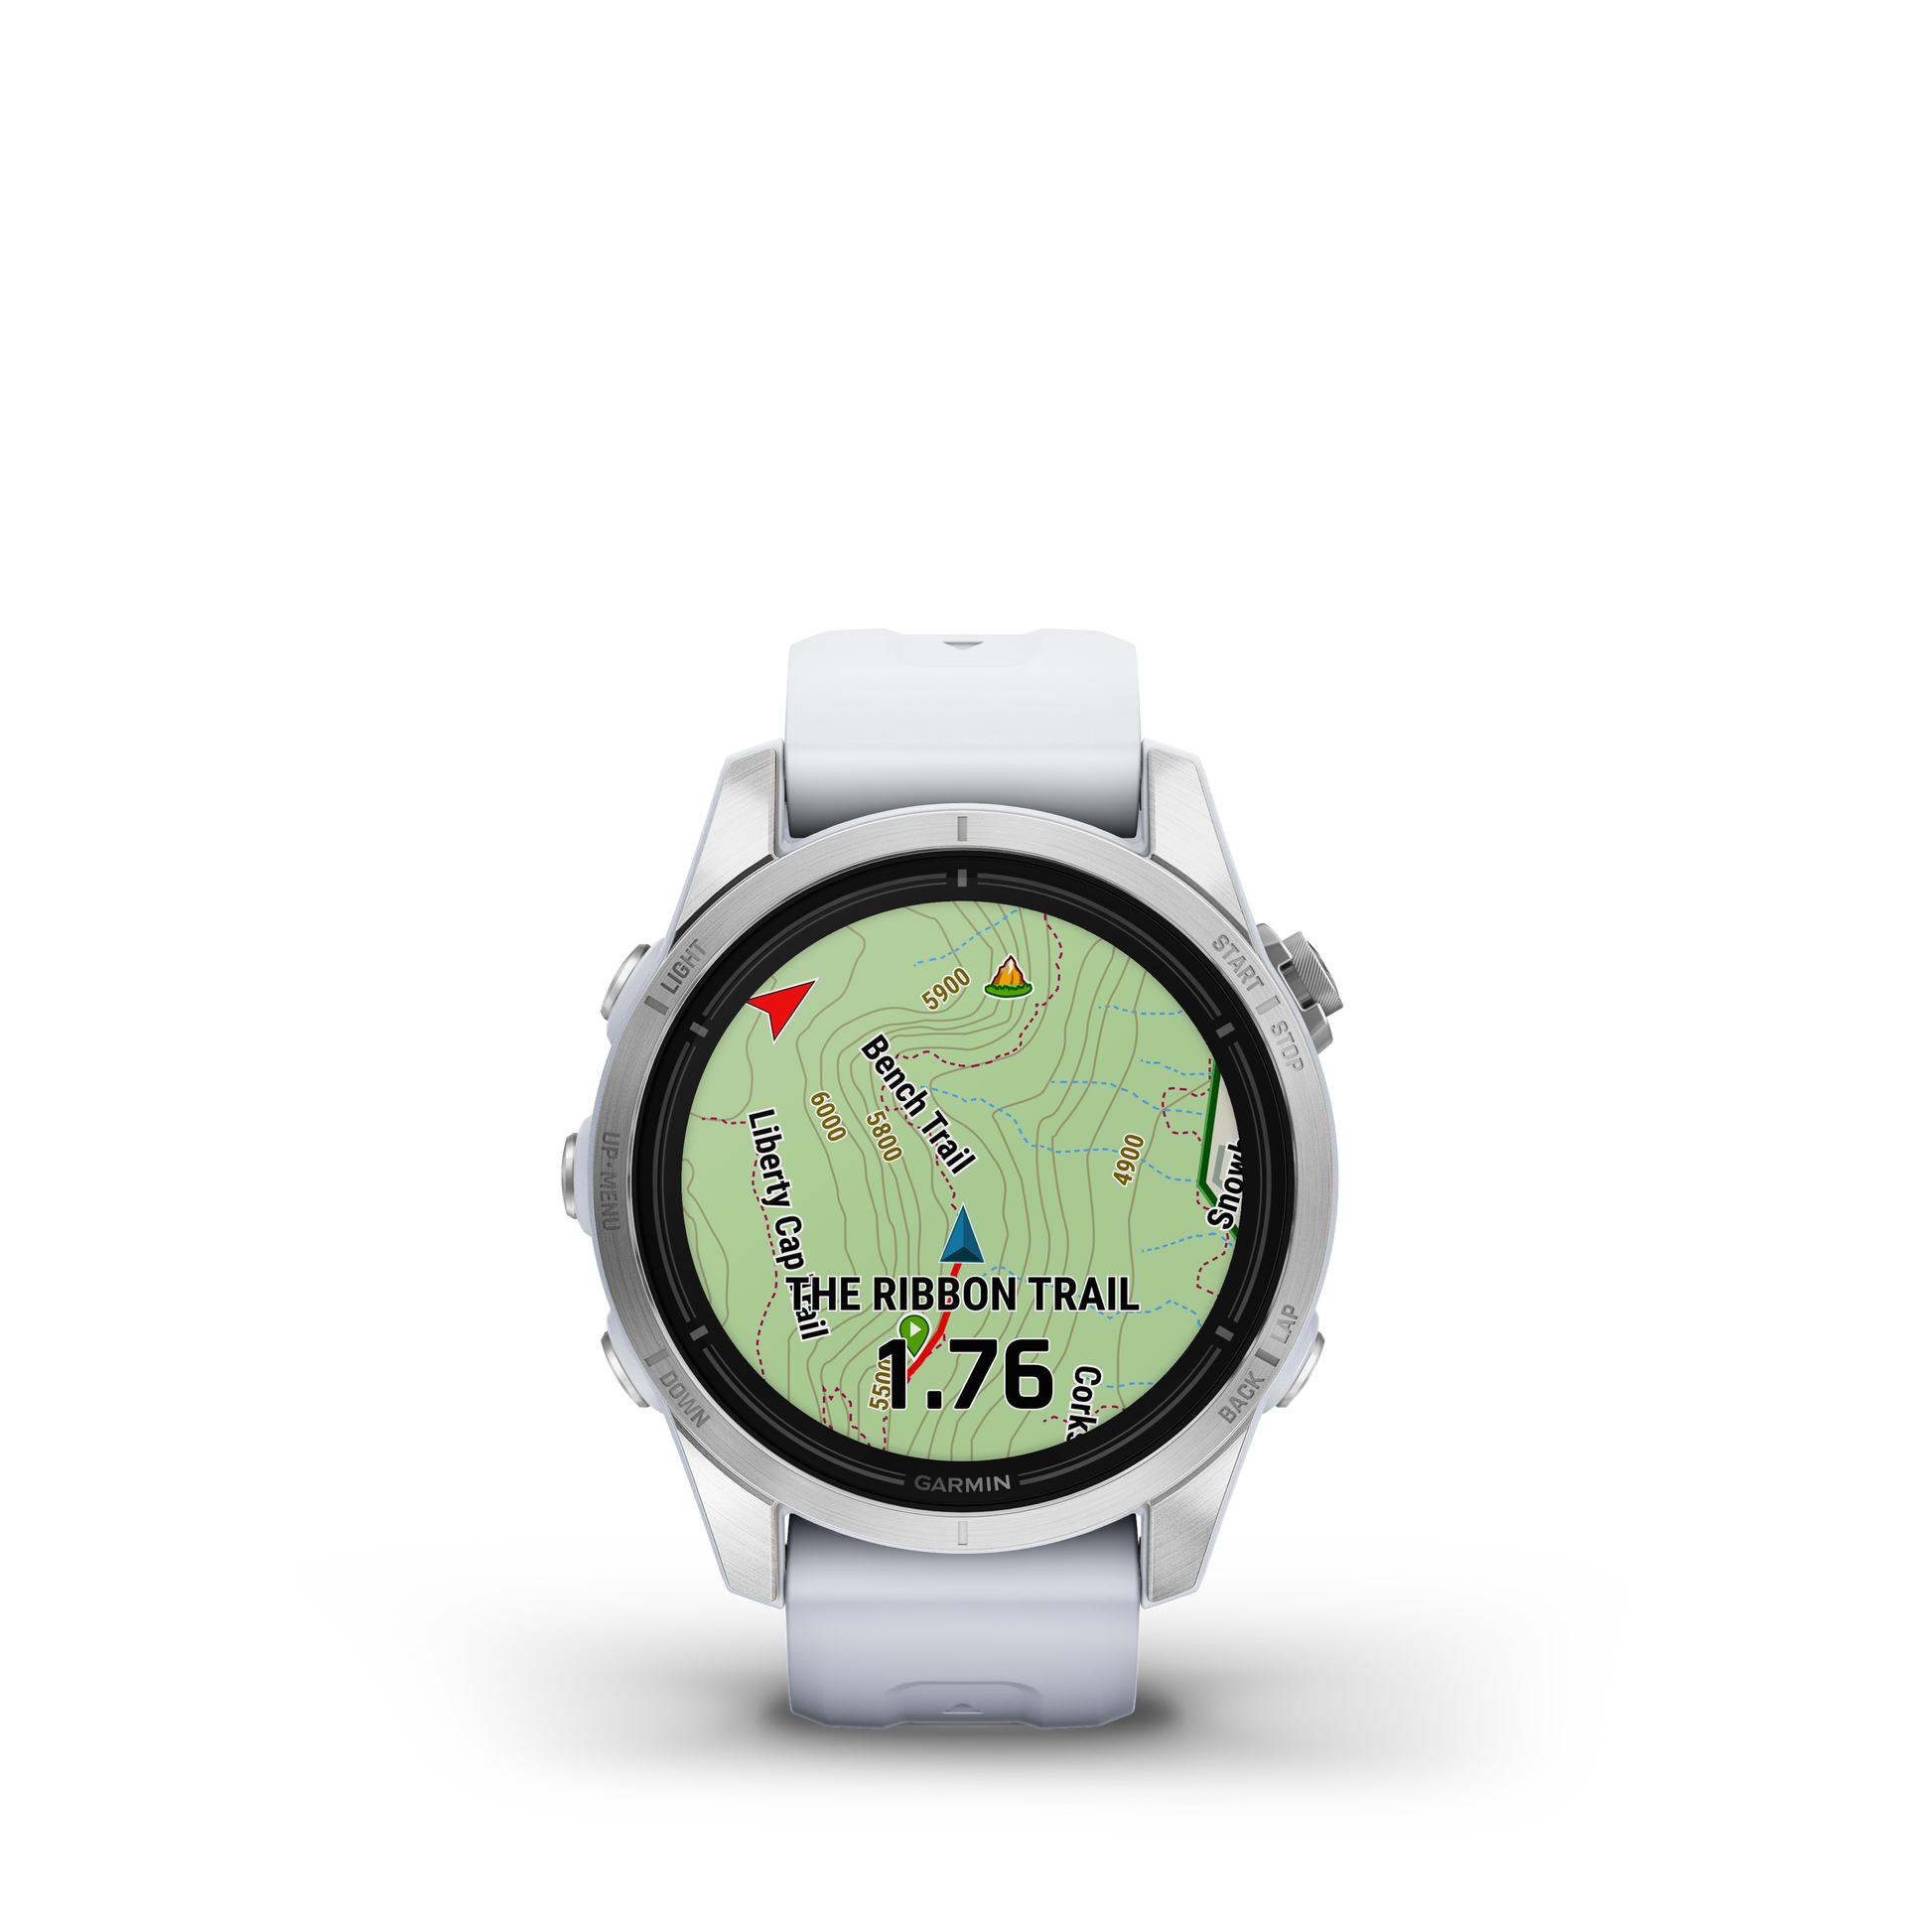  Garmin epix Gen 2, Premium active smartwatch, Health and  wellness features, touchscreen AMOLED display, adventure watch with  advanced features, white titanium : Electronics